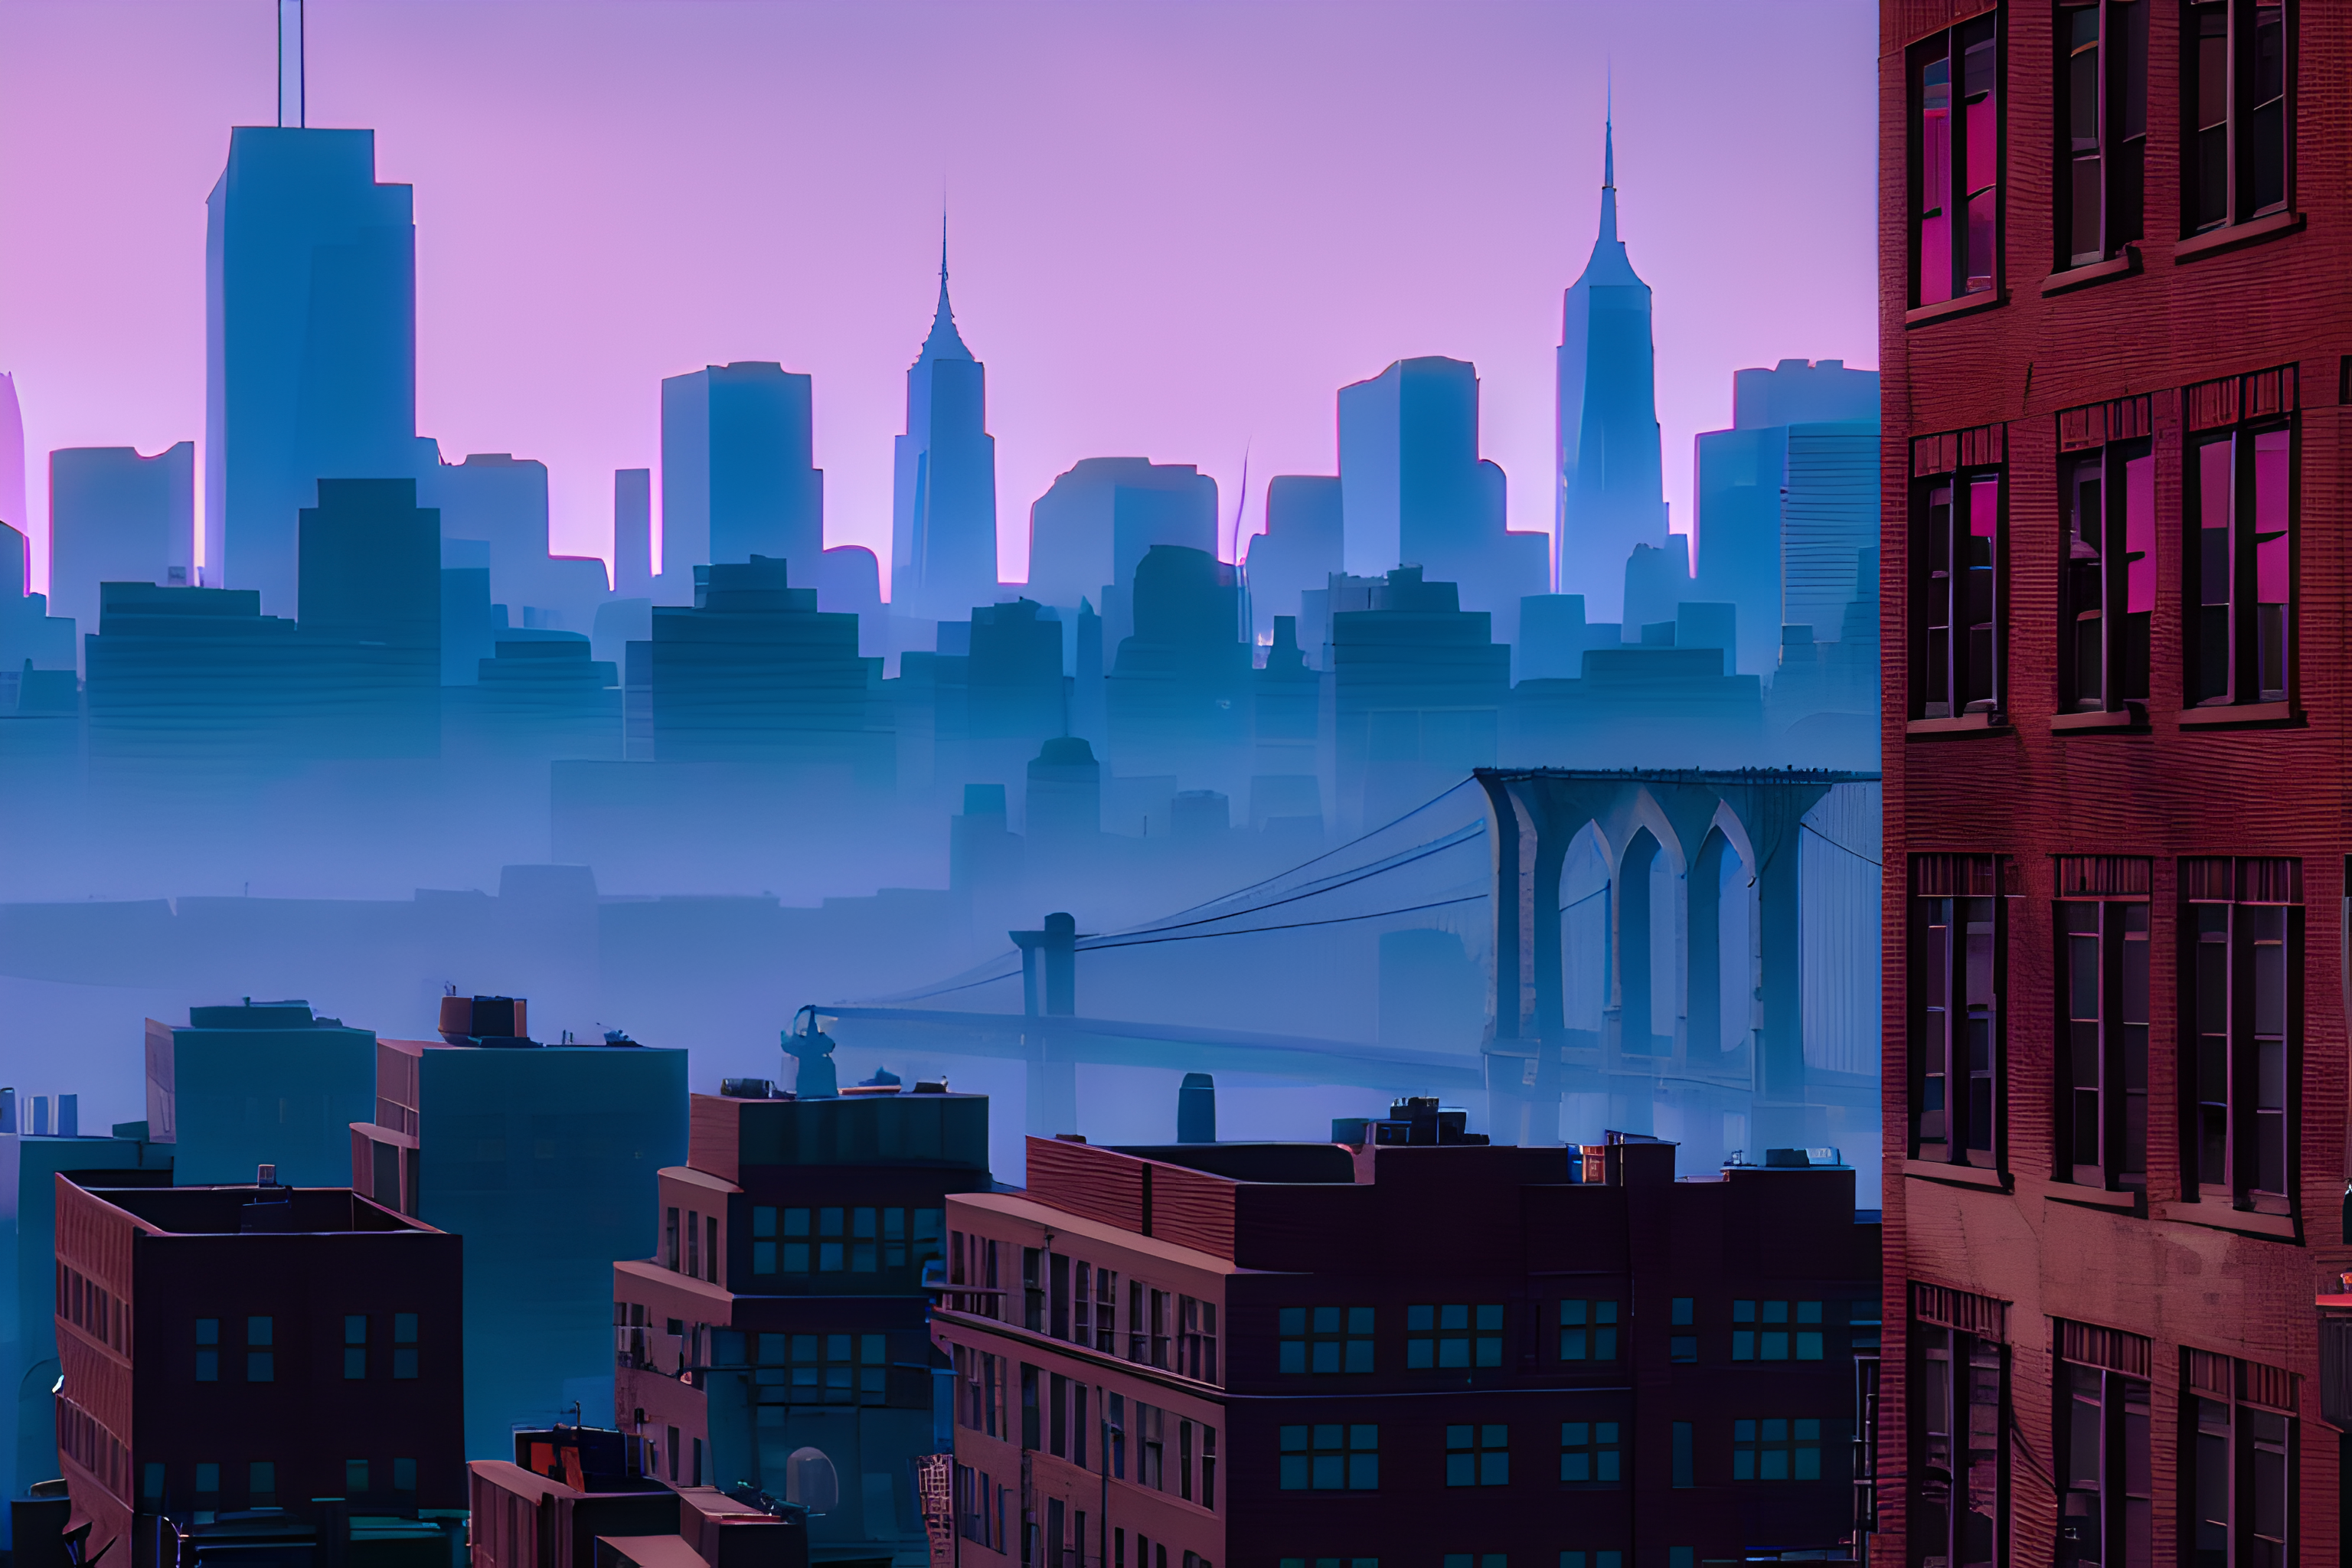 General 3072x2048 Spider-Verse spiderverse Spider-Man: Into the Spider-Verse Spiderman Miles Morales New York City Stable Diffusion city Brooklyn AI art